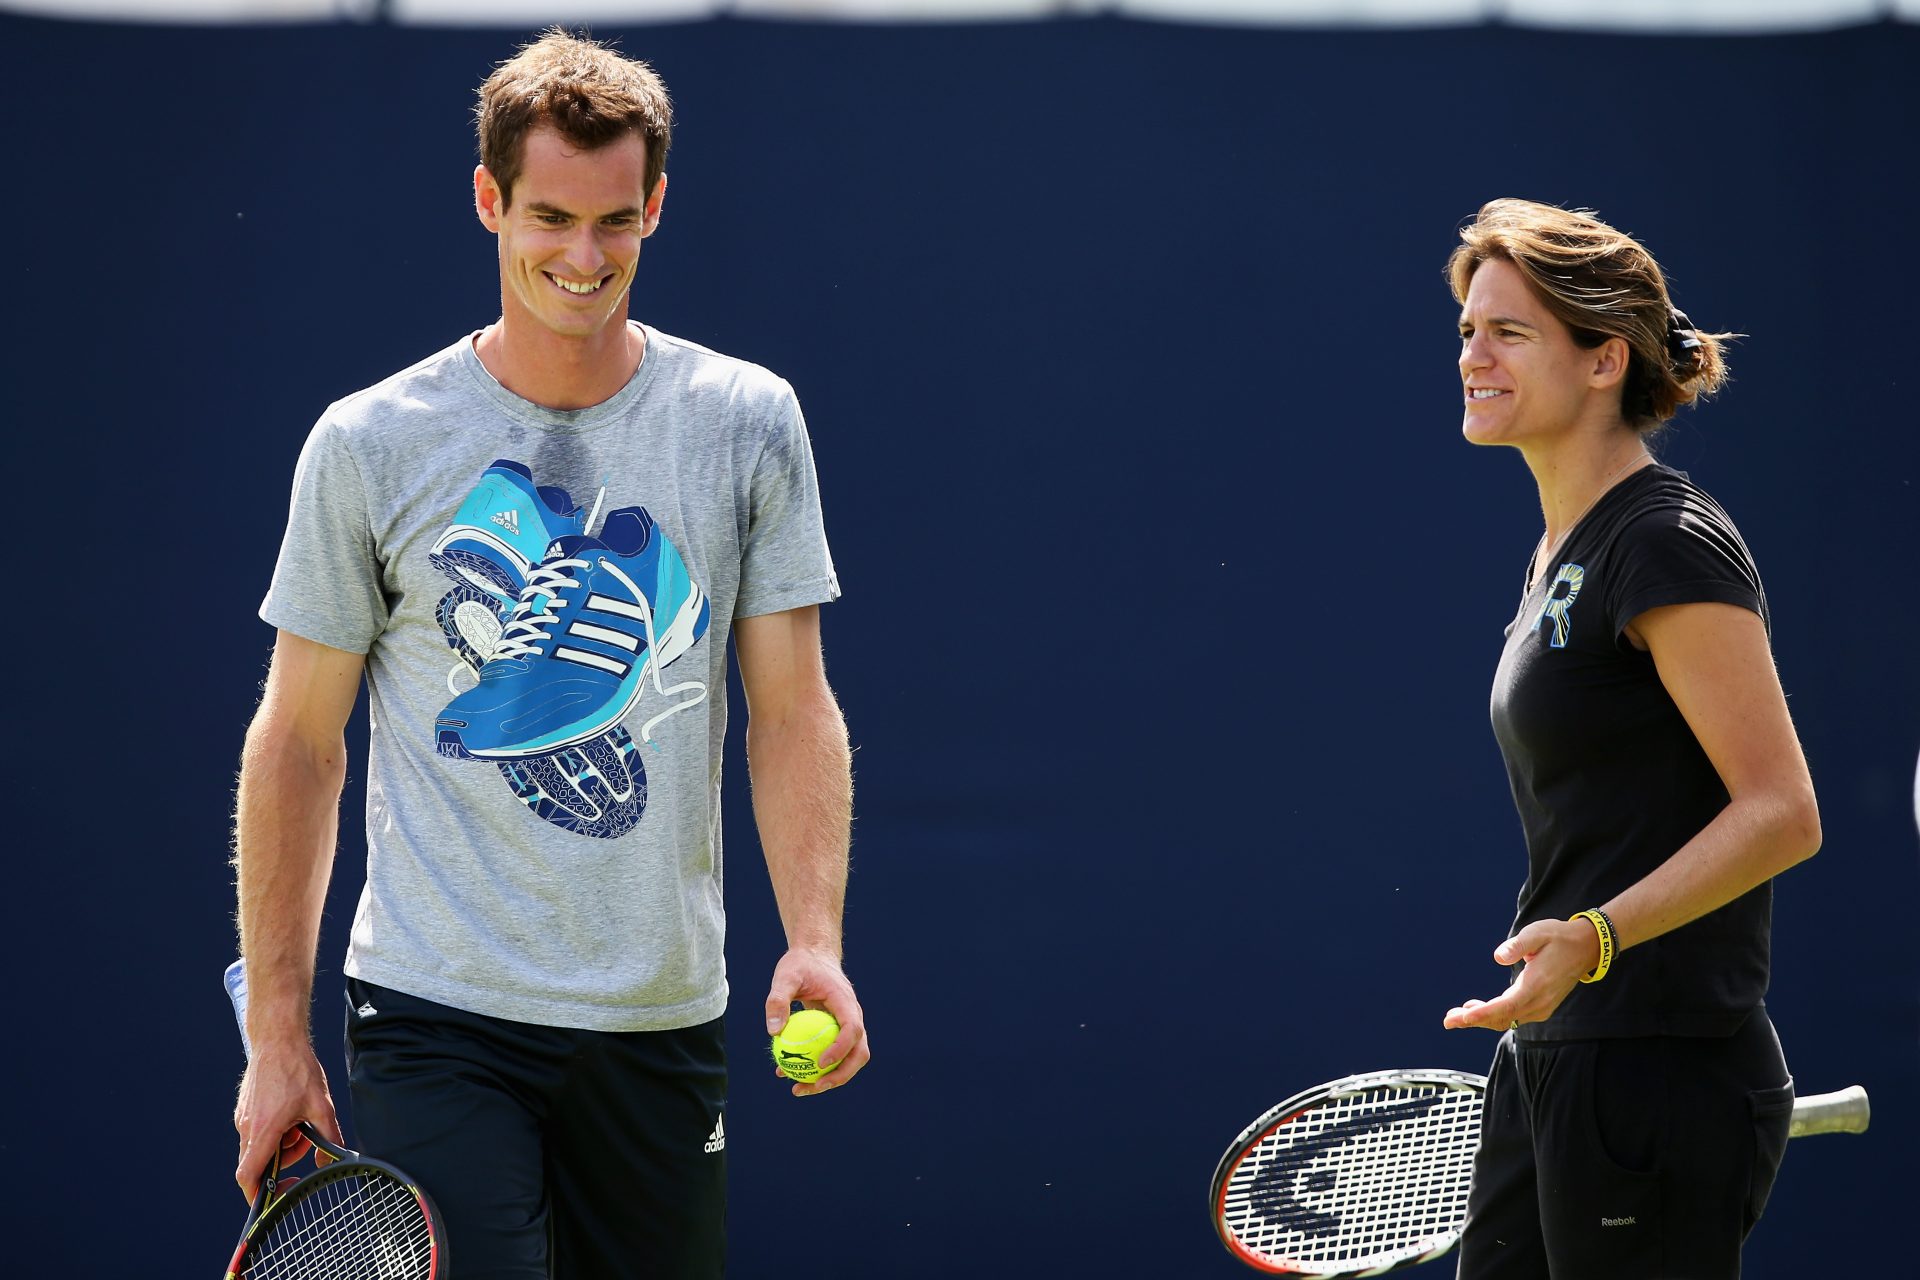 2014: Andy Murray's coach